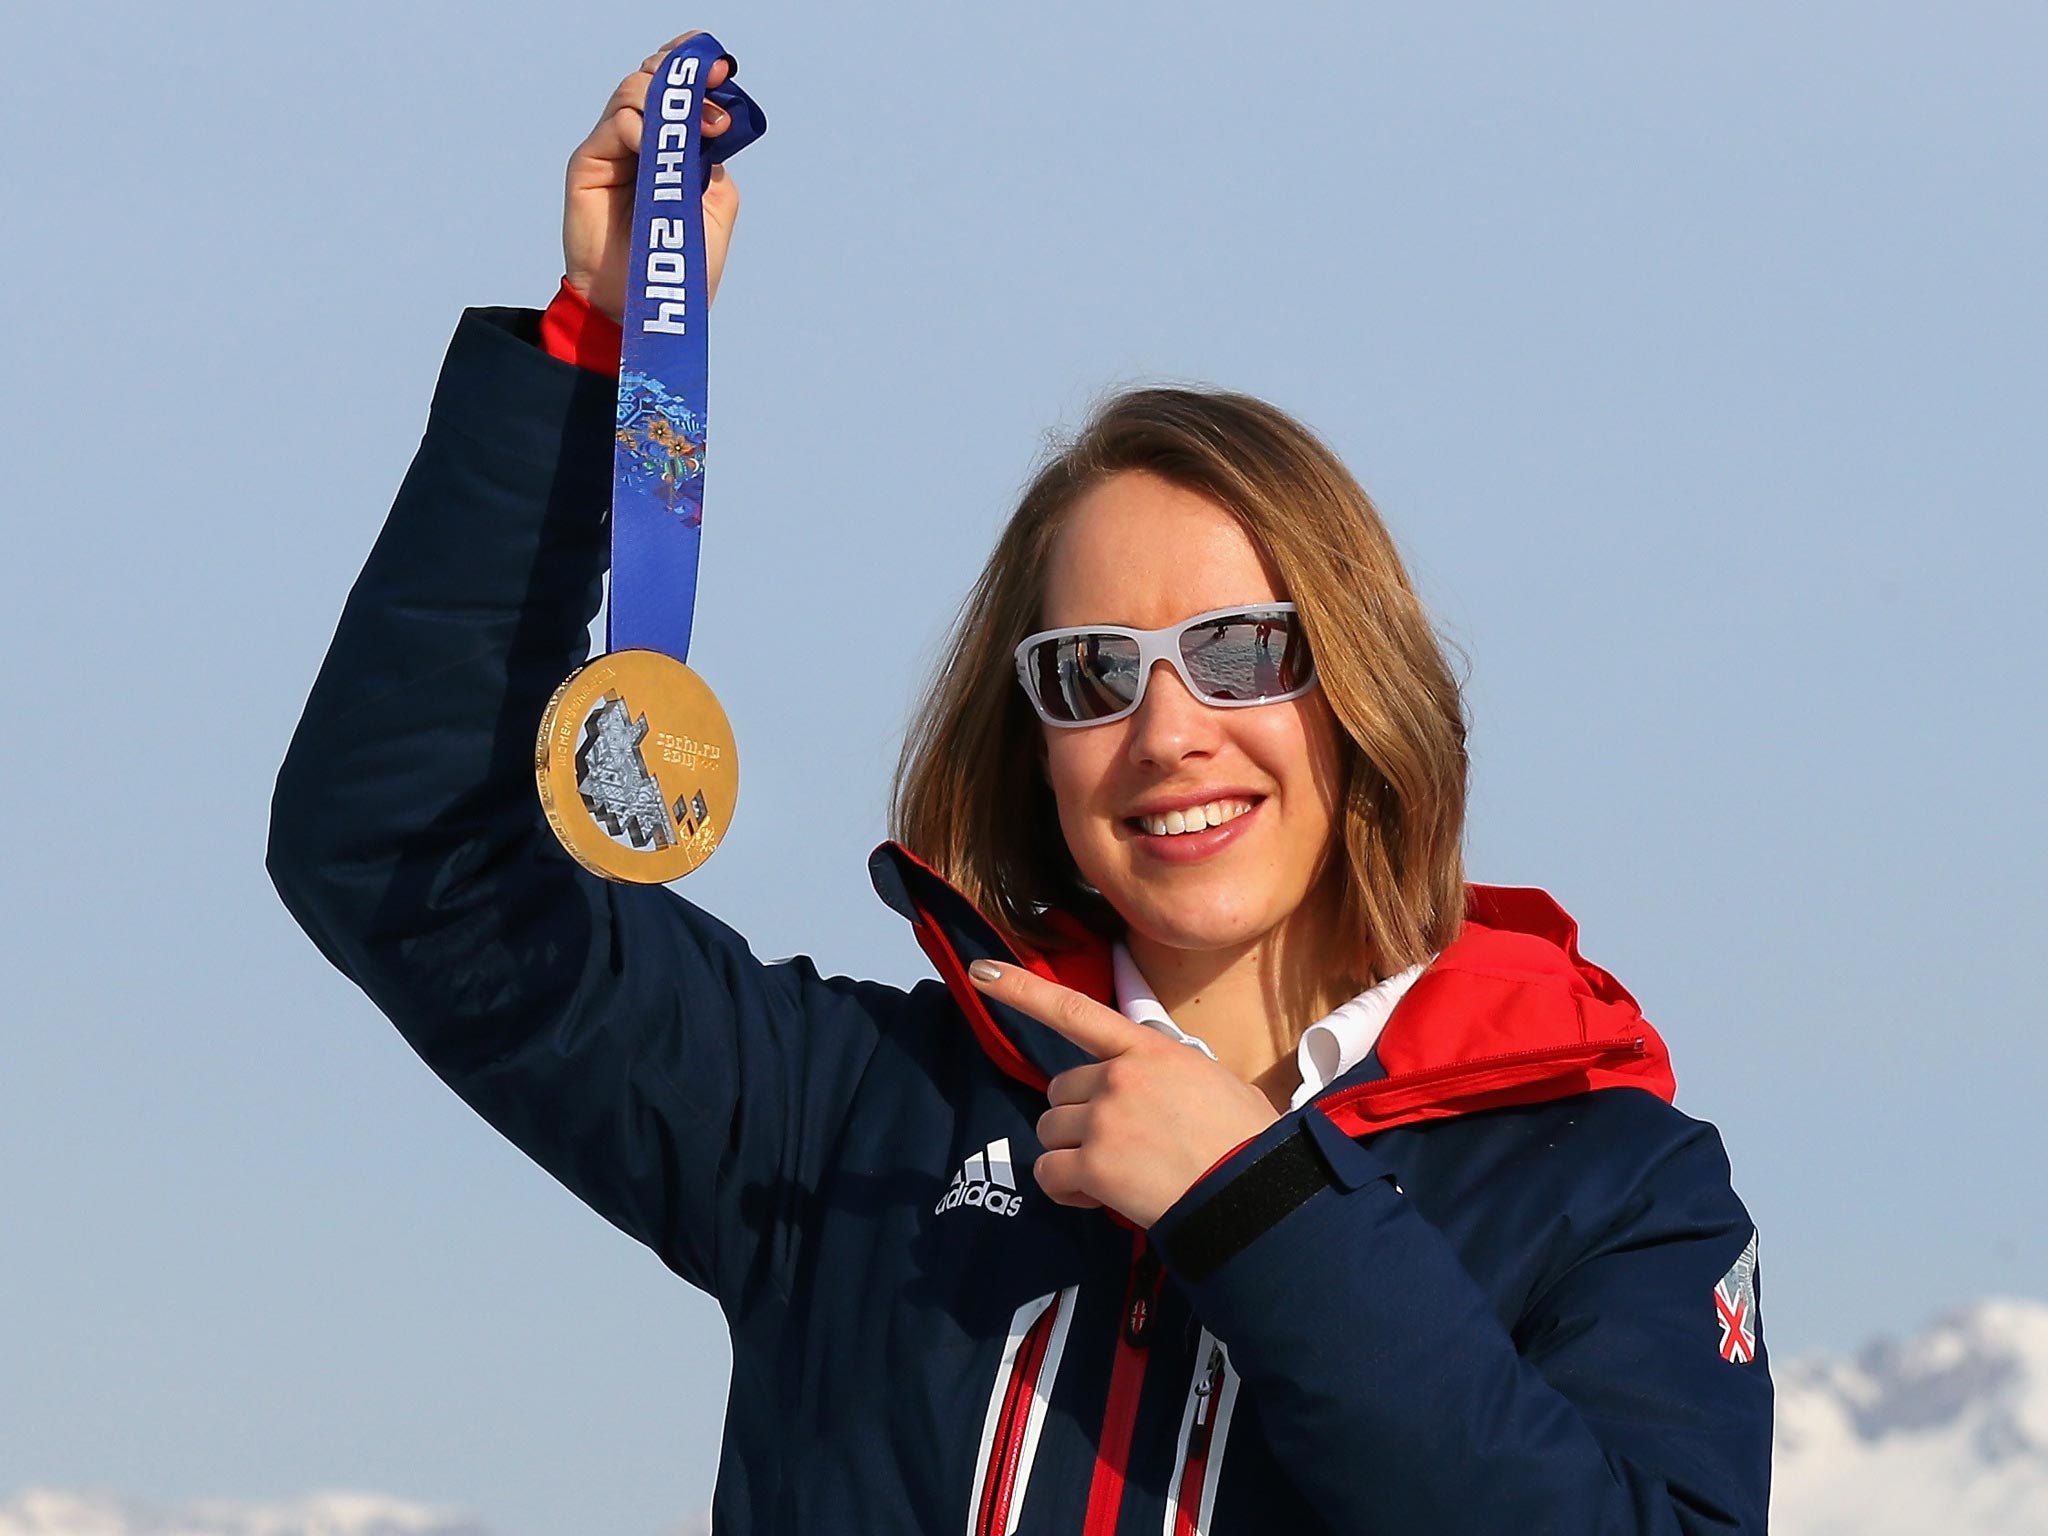 Lizzy Yarnold, Olympic gold medallist: ‘It’s about being you, being proud and confident’